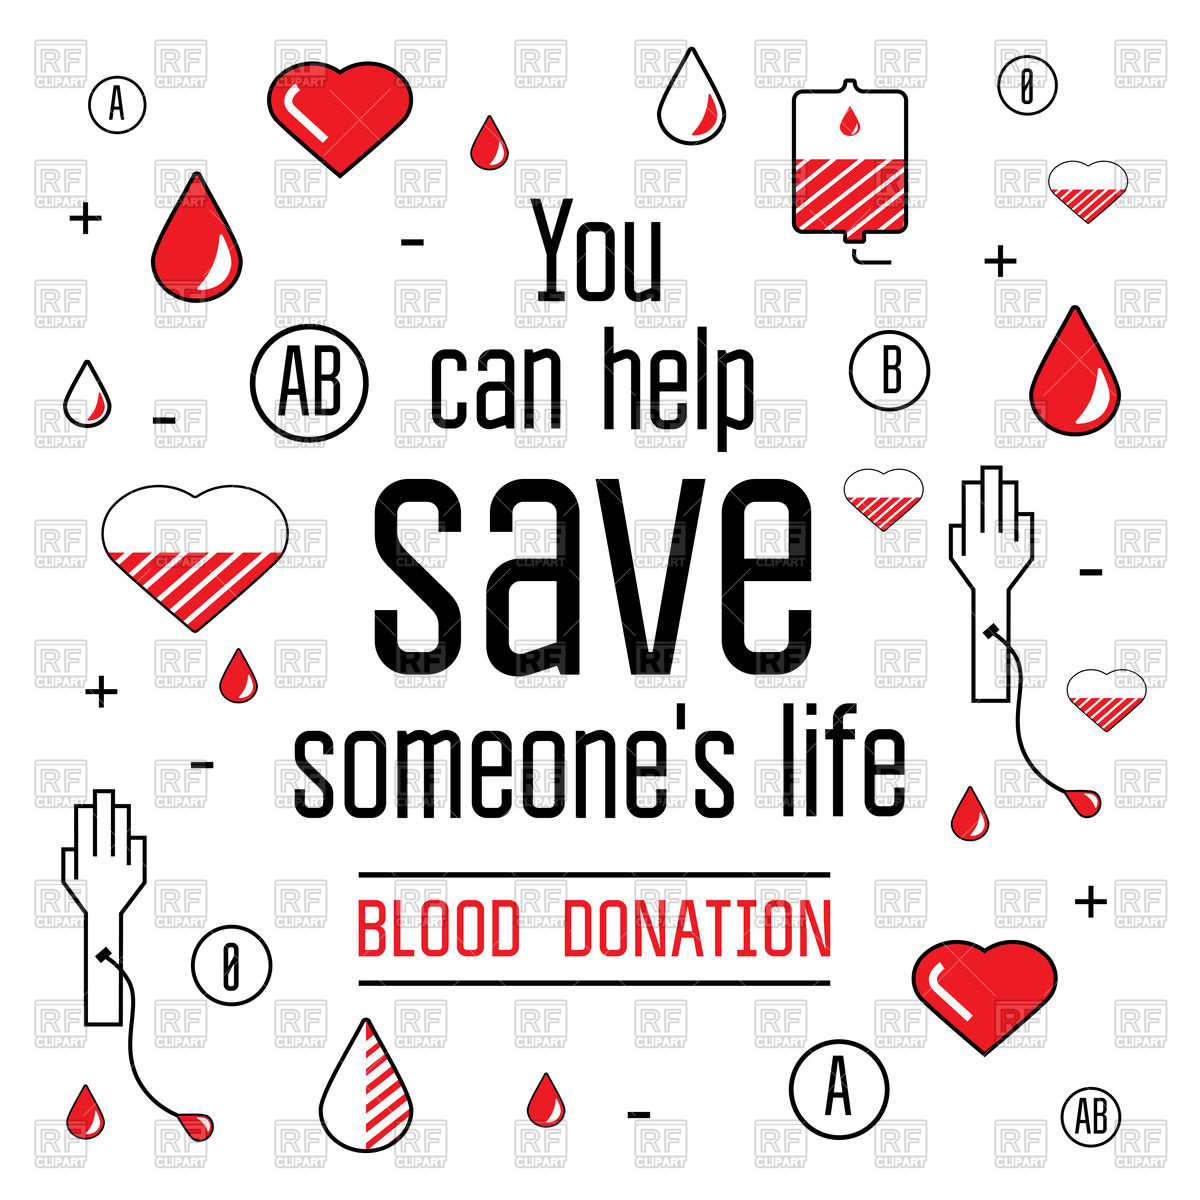 Blood donation icons.